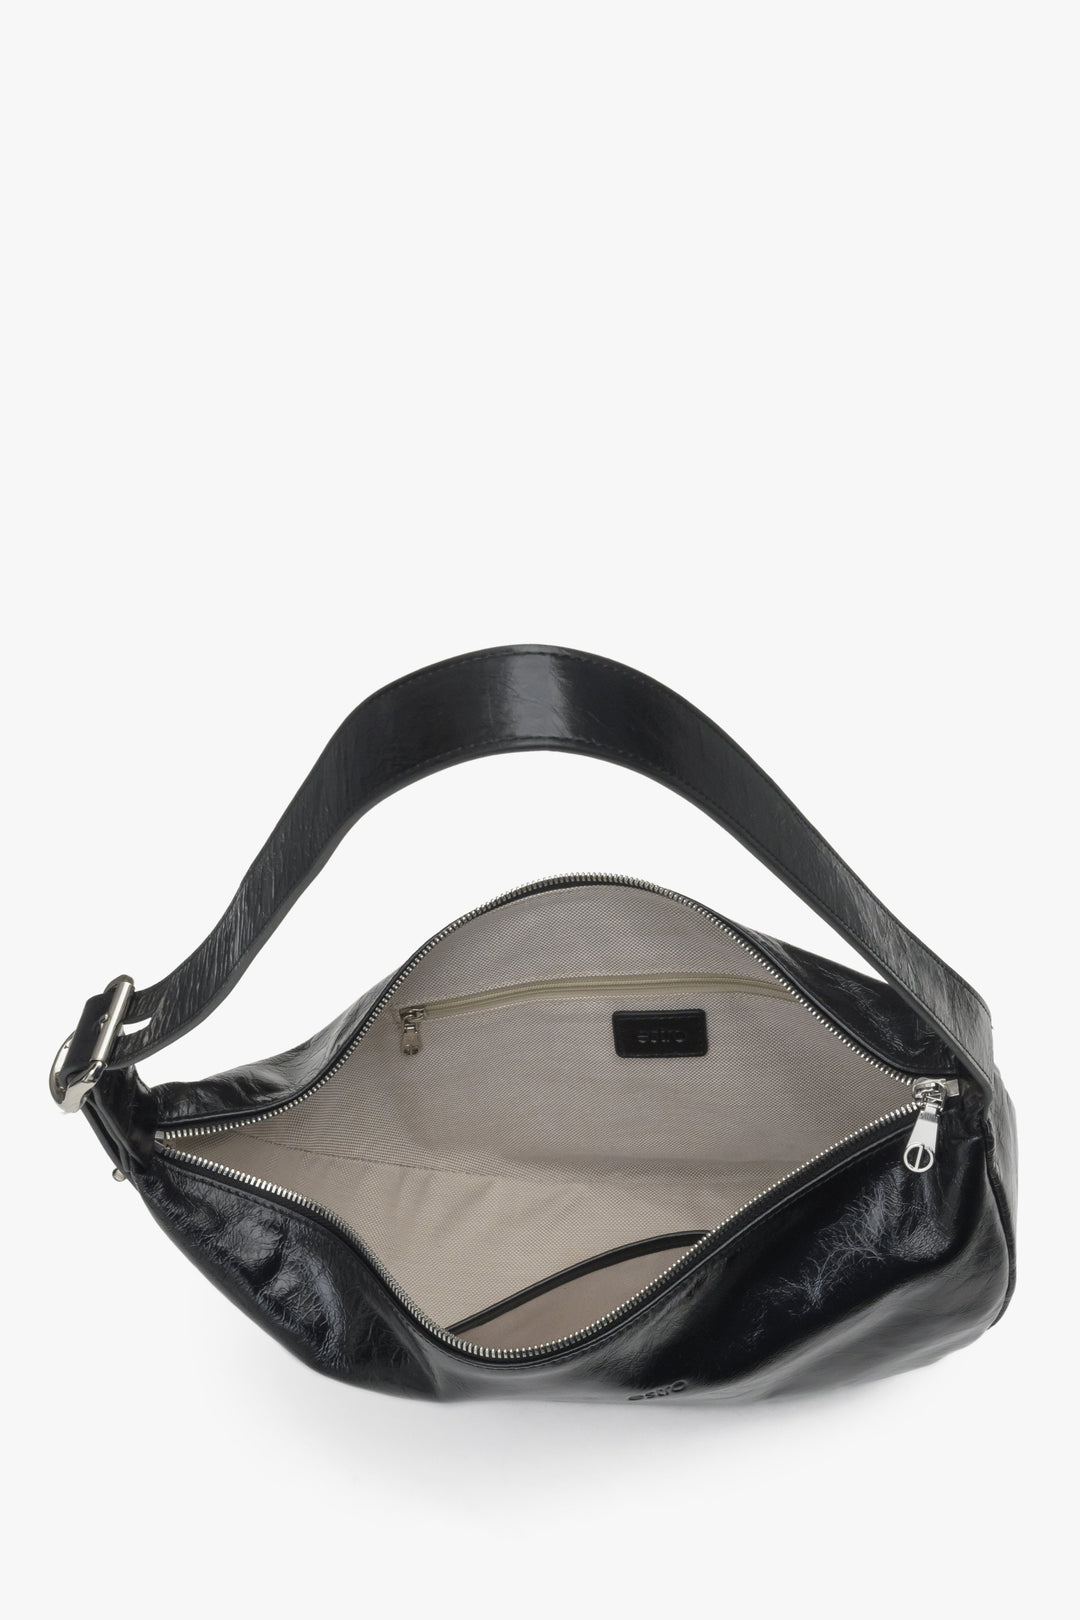 Women's black patent leather Estro shoulder bag - close-up on the interior of the model.